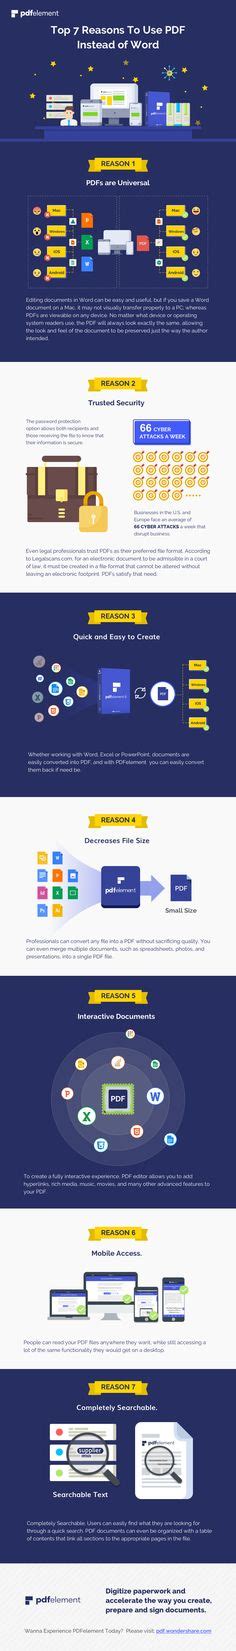 9 Best Pdf Infographic Images Infographic Pdf Software